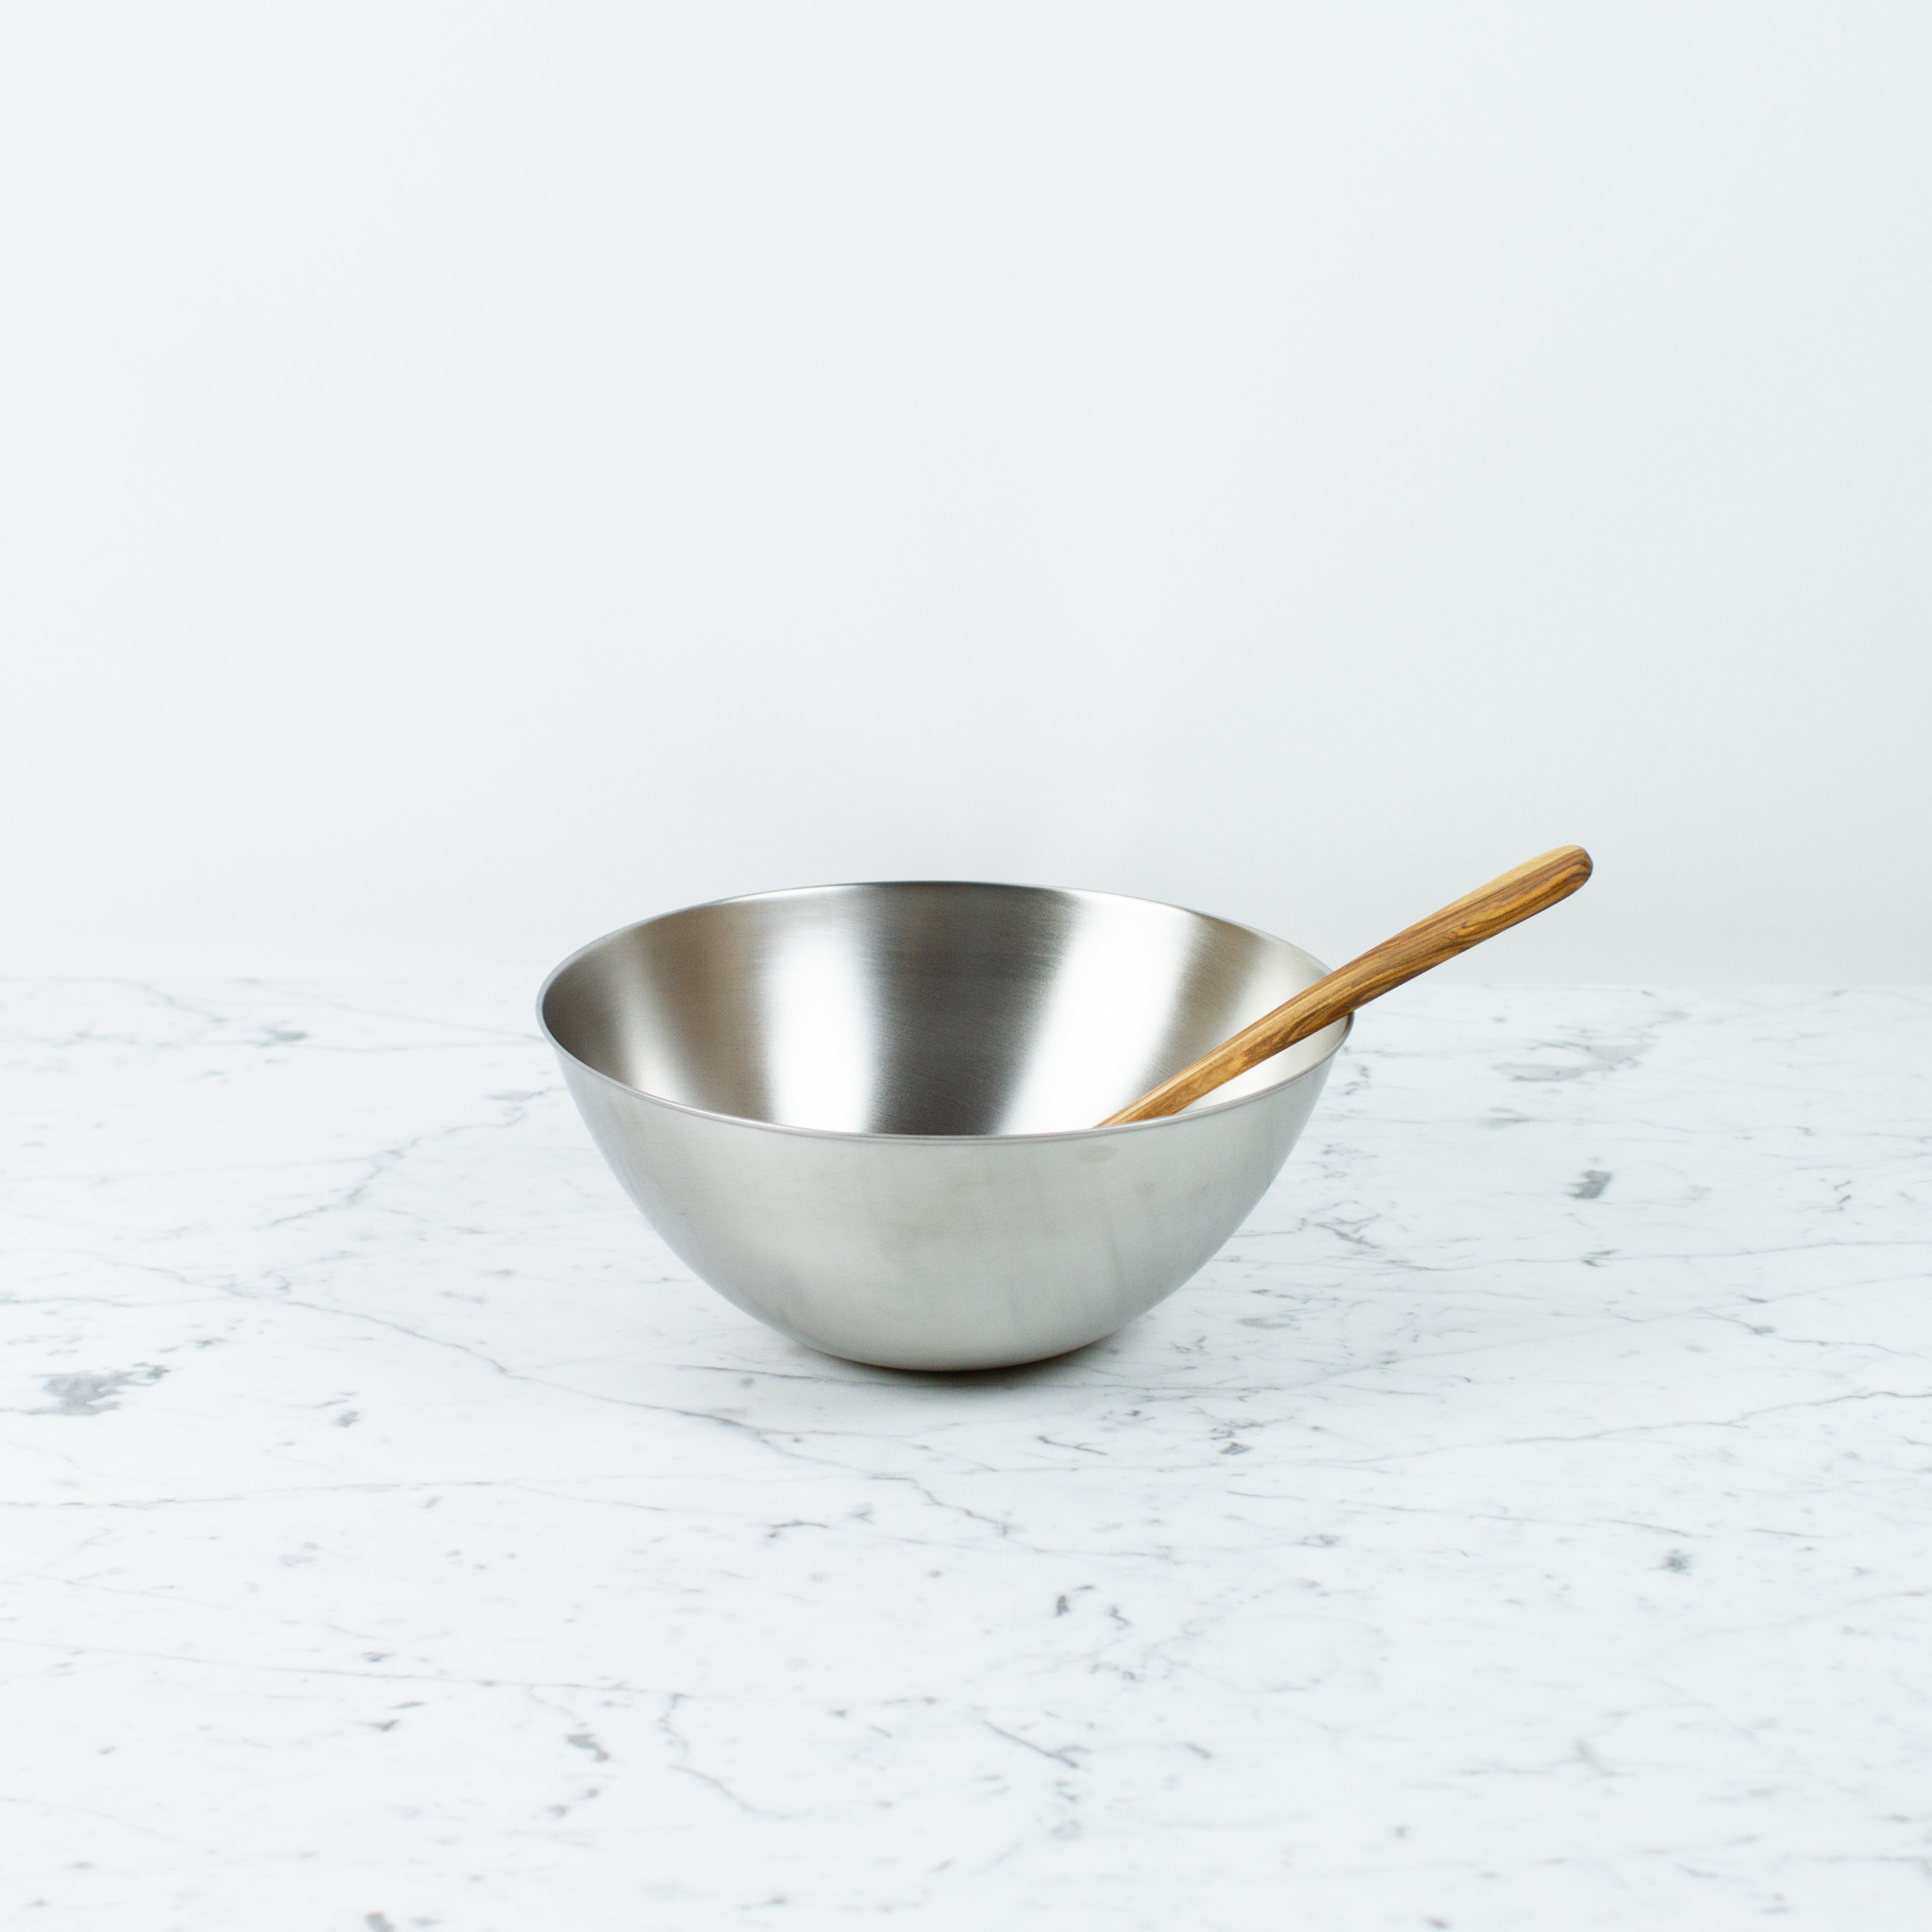 Japanese Stainless Steel Mixing Bowl - 10.75"